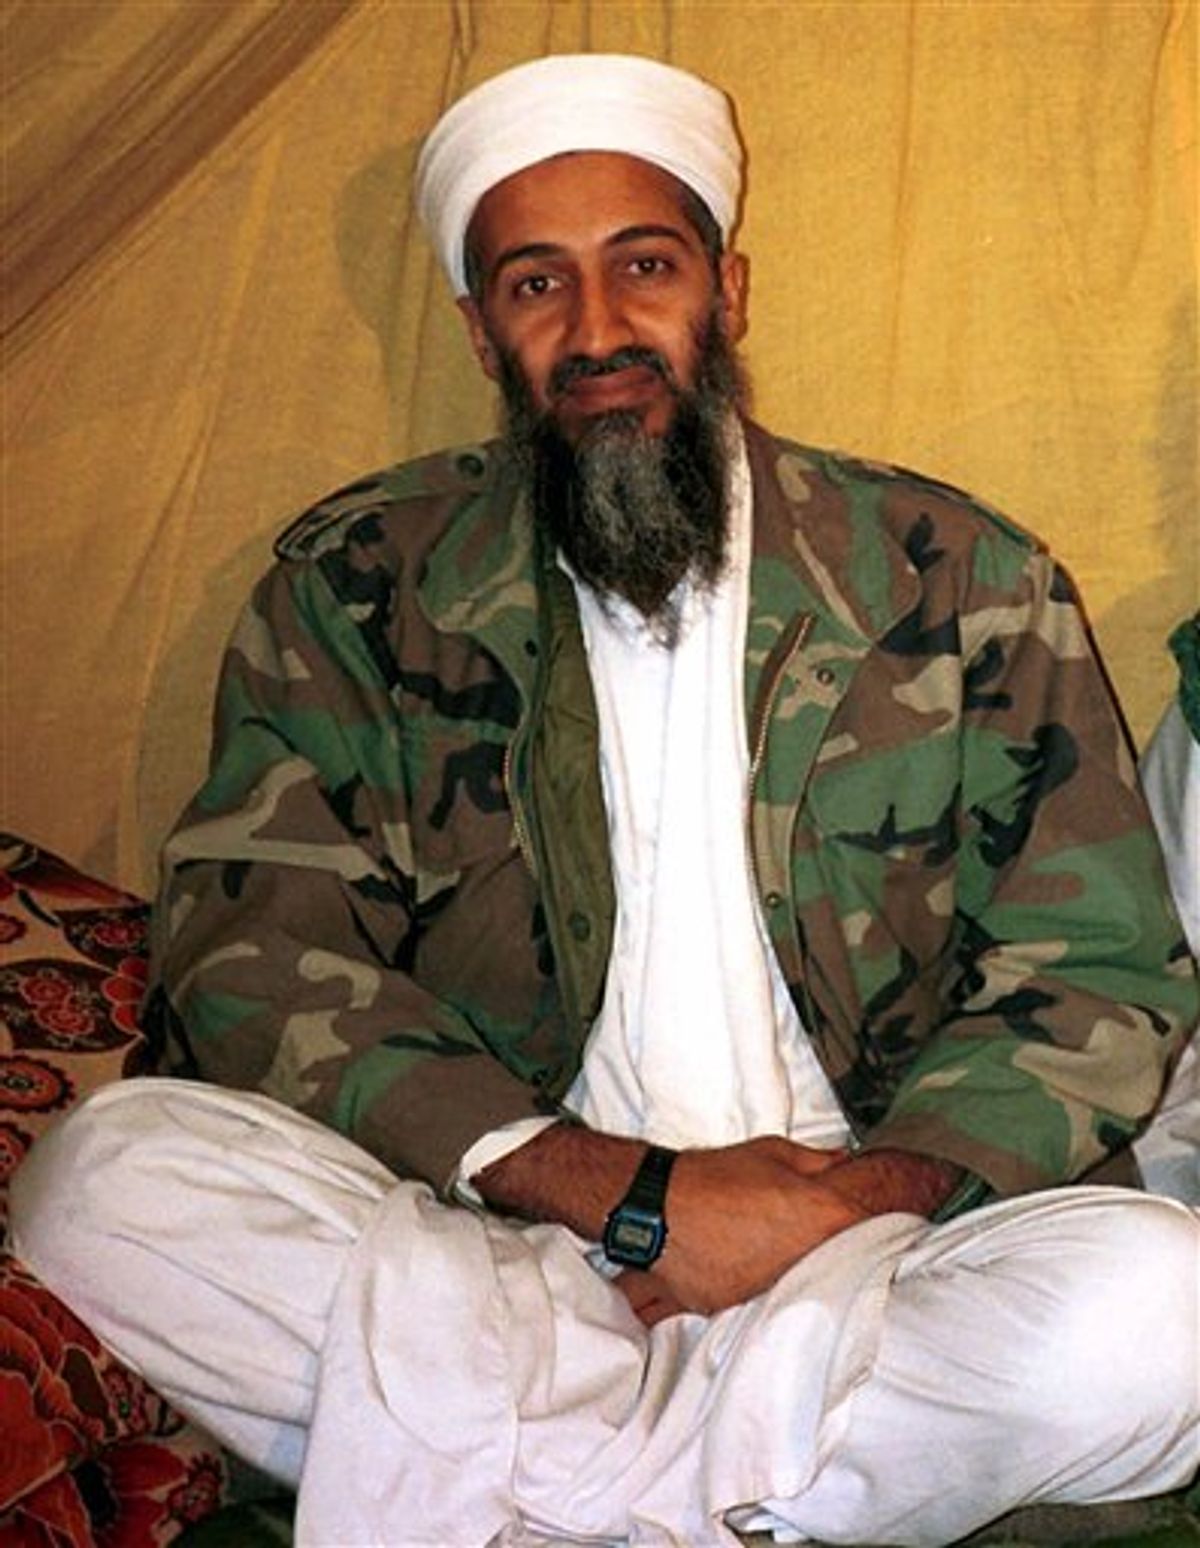 FILE - This is an undated photo of al-Qaida chief Osama bin Laden. Bin Laden issued a new audio message claiming responsibility for the Christmas day bombing attempt in Detroit and vowed further attacks. (AP Photo, File) (AP)